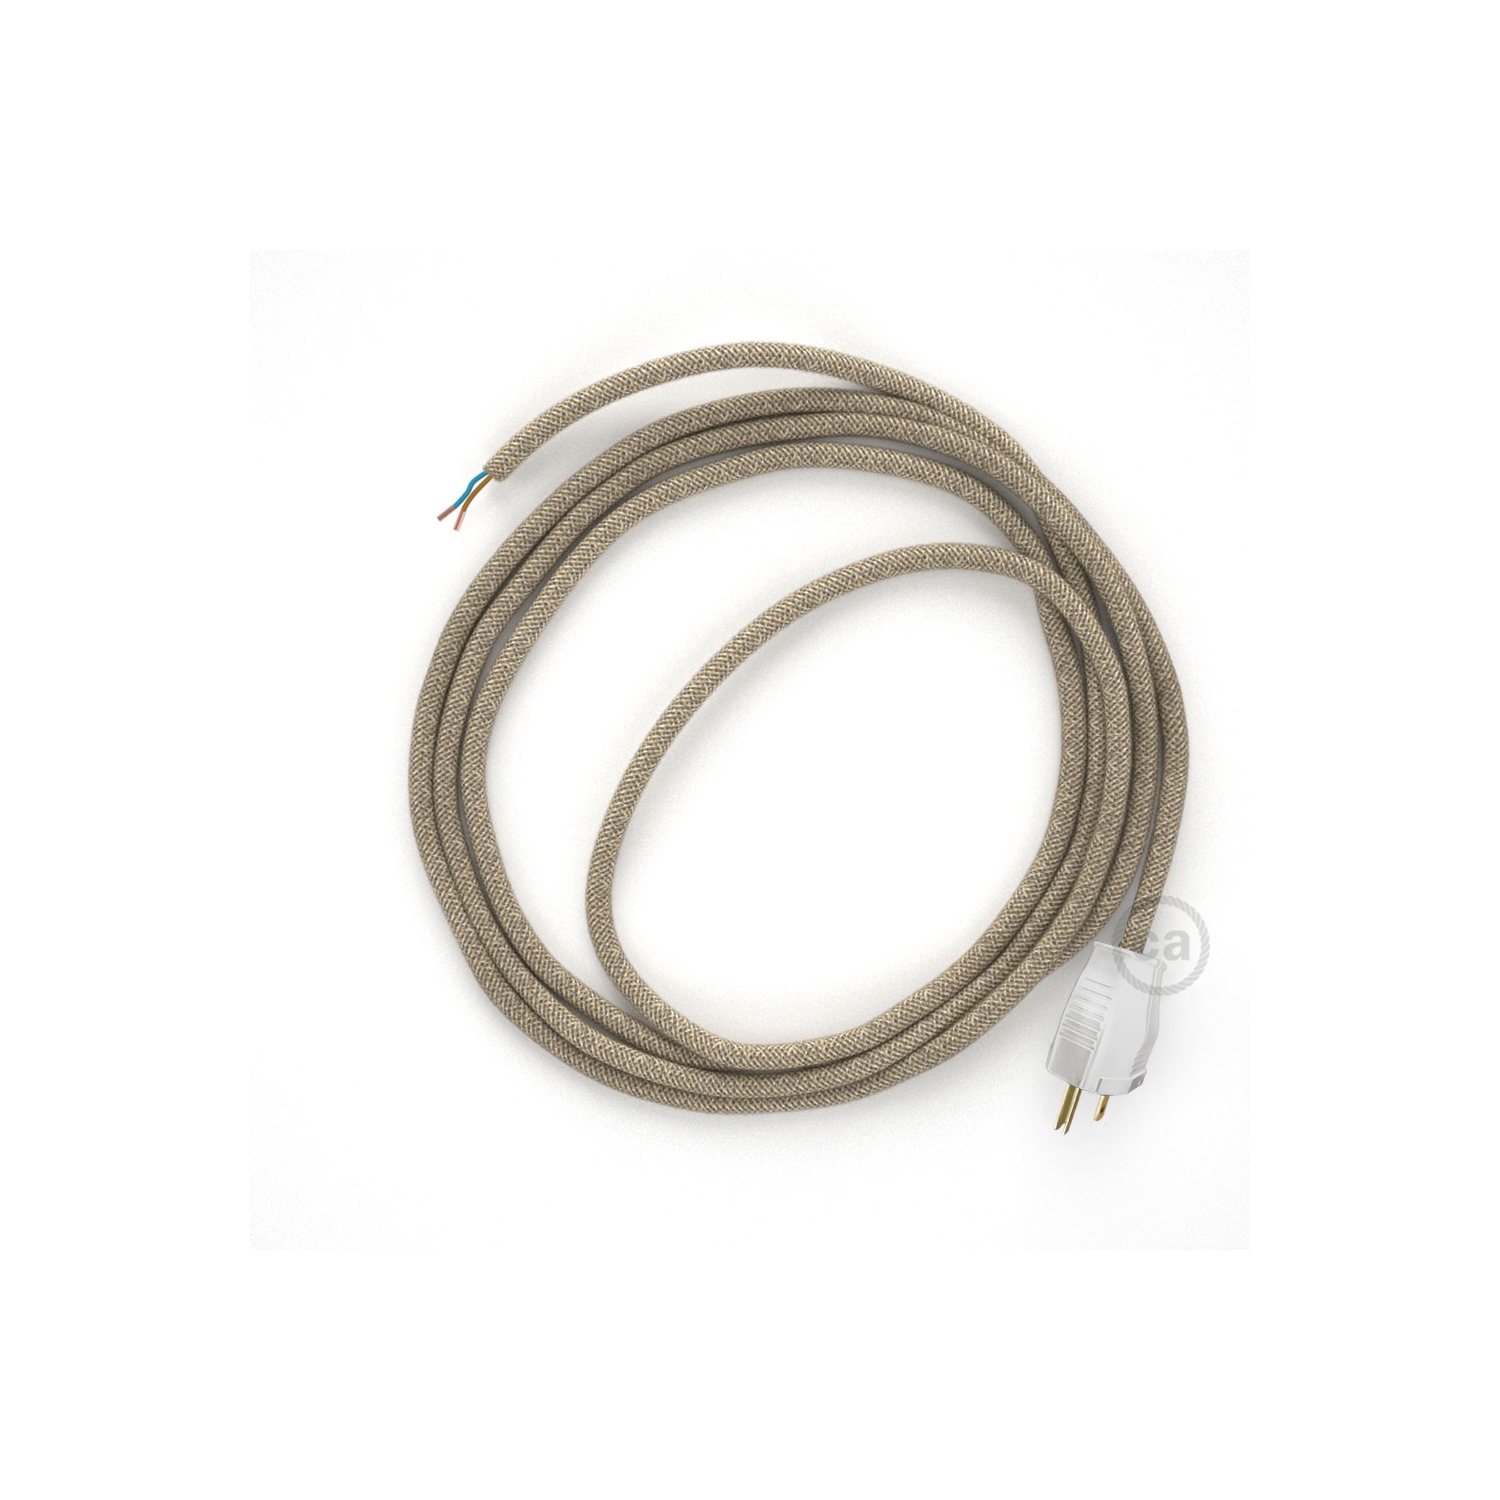 Cord-set - RN01 Natural Linen Covered Round Cable